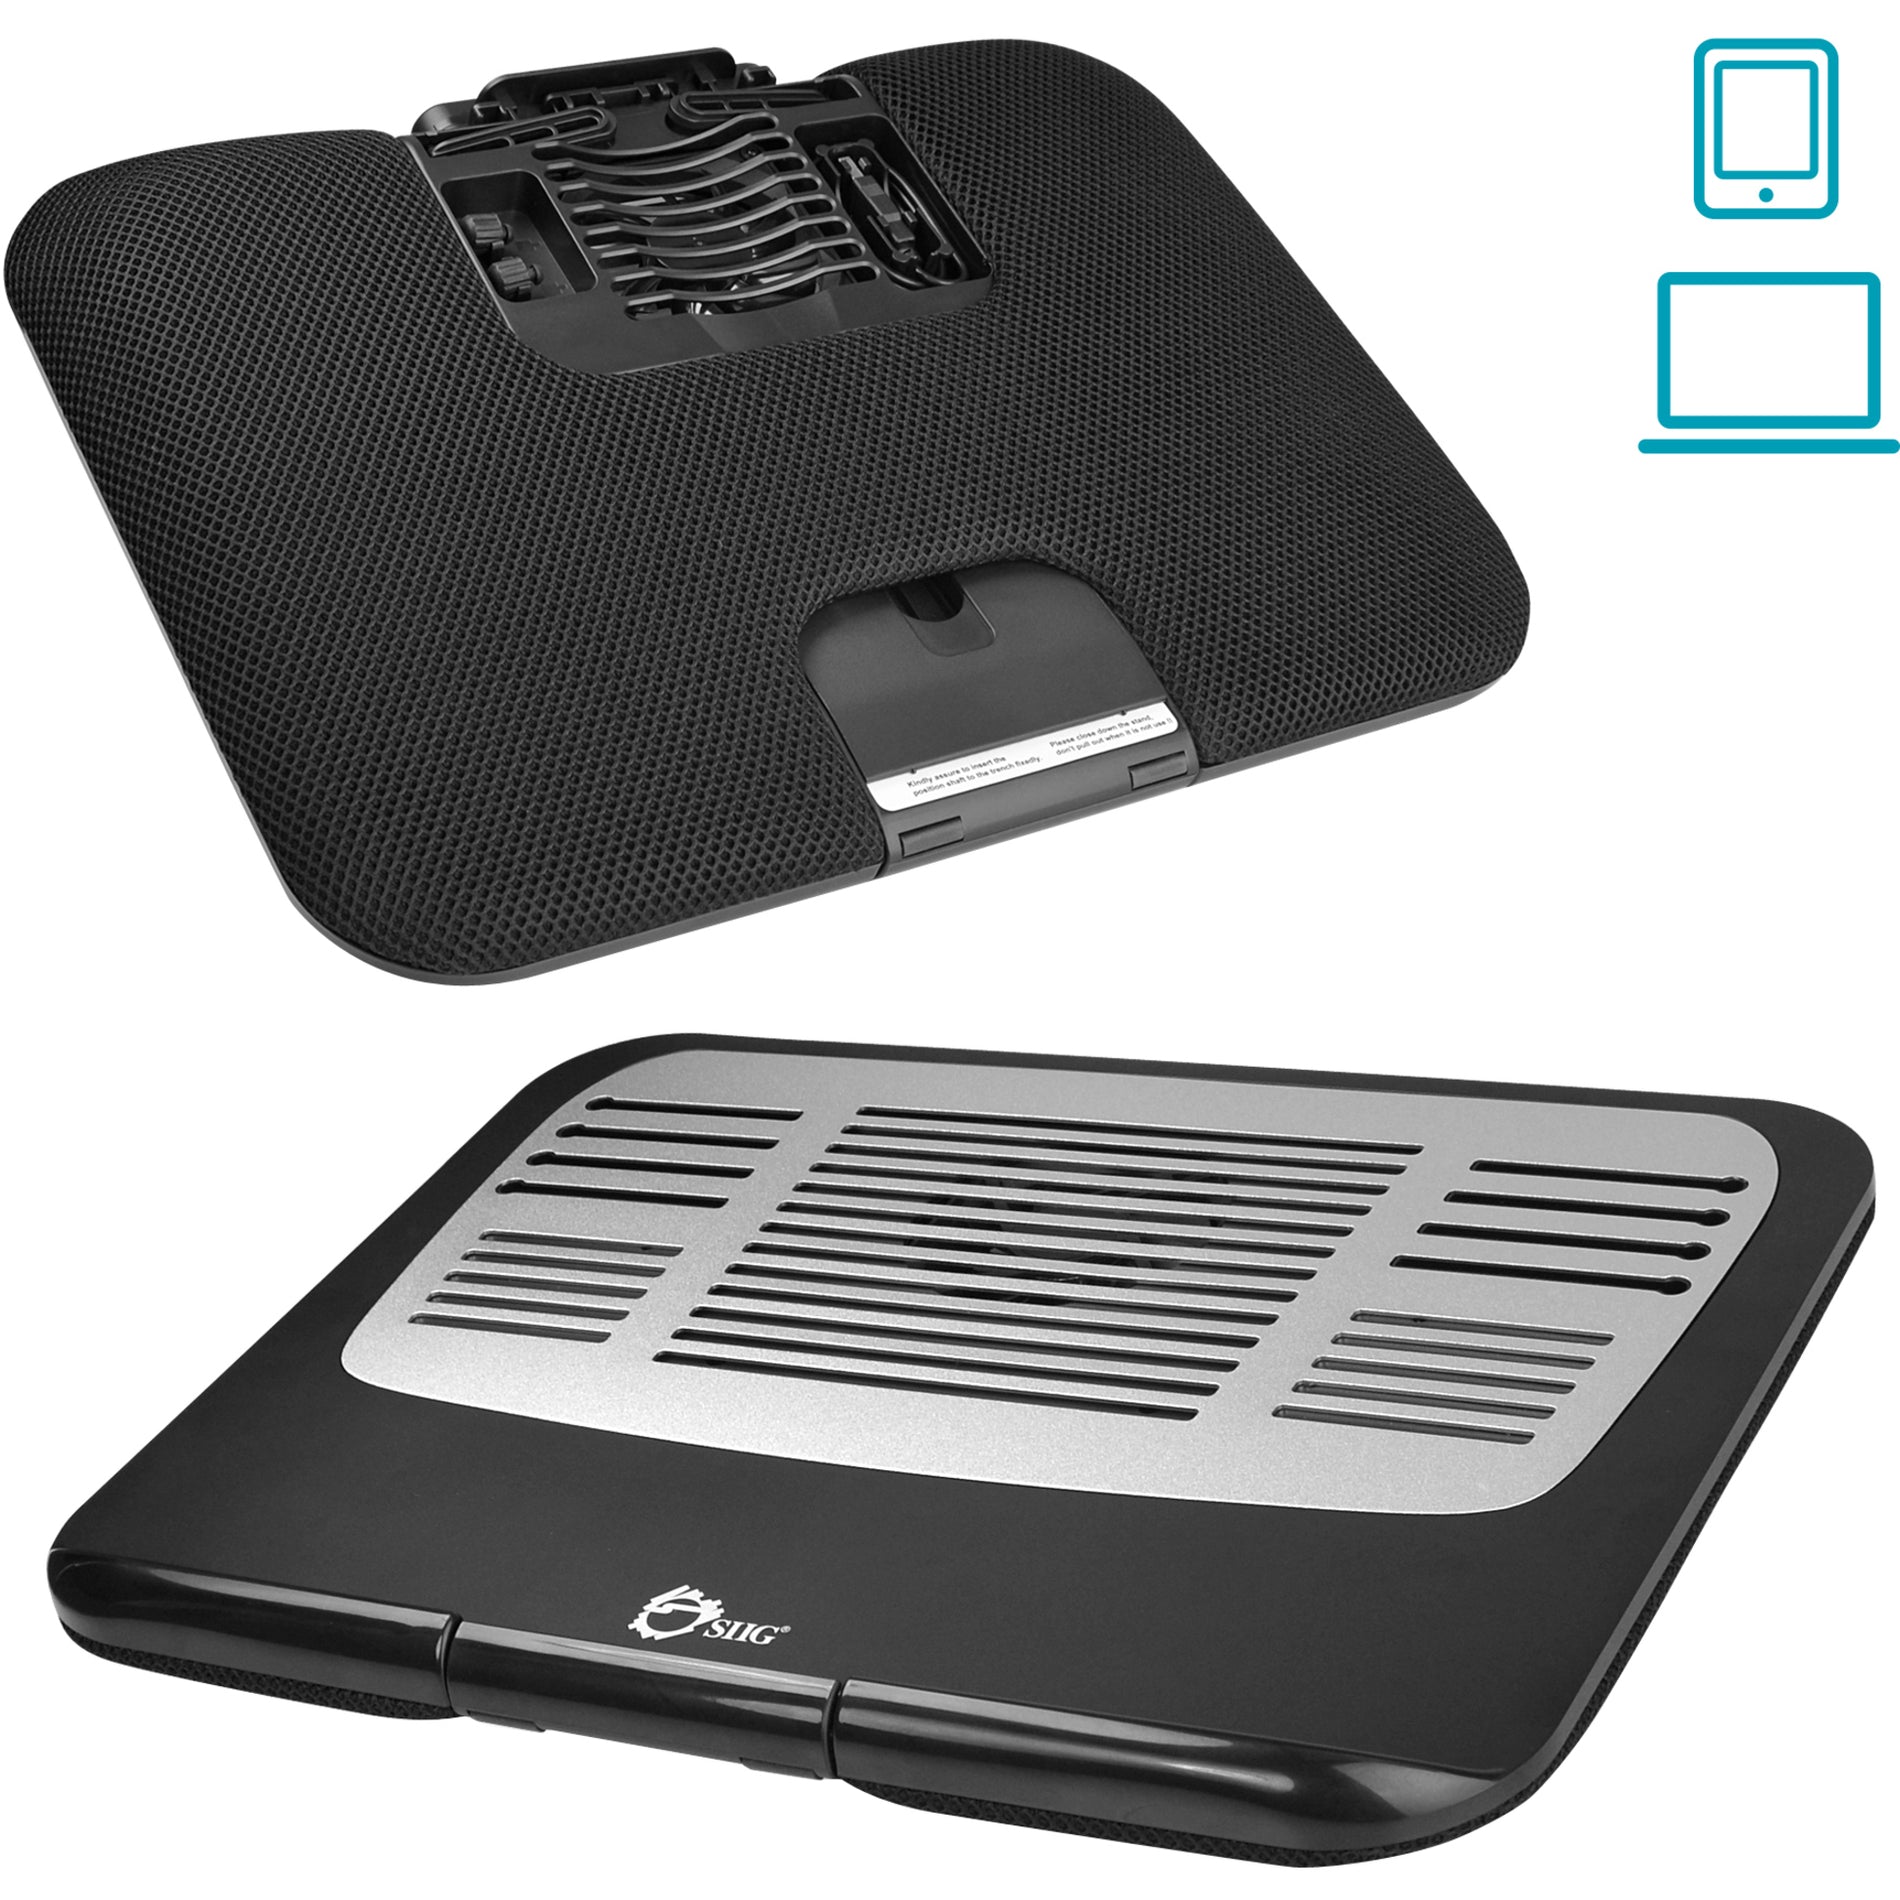 SIIG CE-CP0011-S1 Ergonomic Multi-Angle Tilted Laptop Cooling Pad, USB Powered, up to 17" Notebook